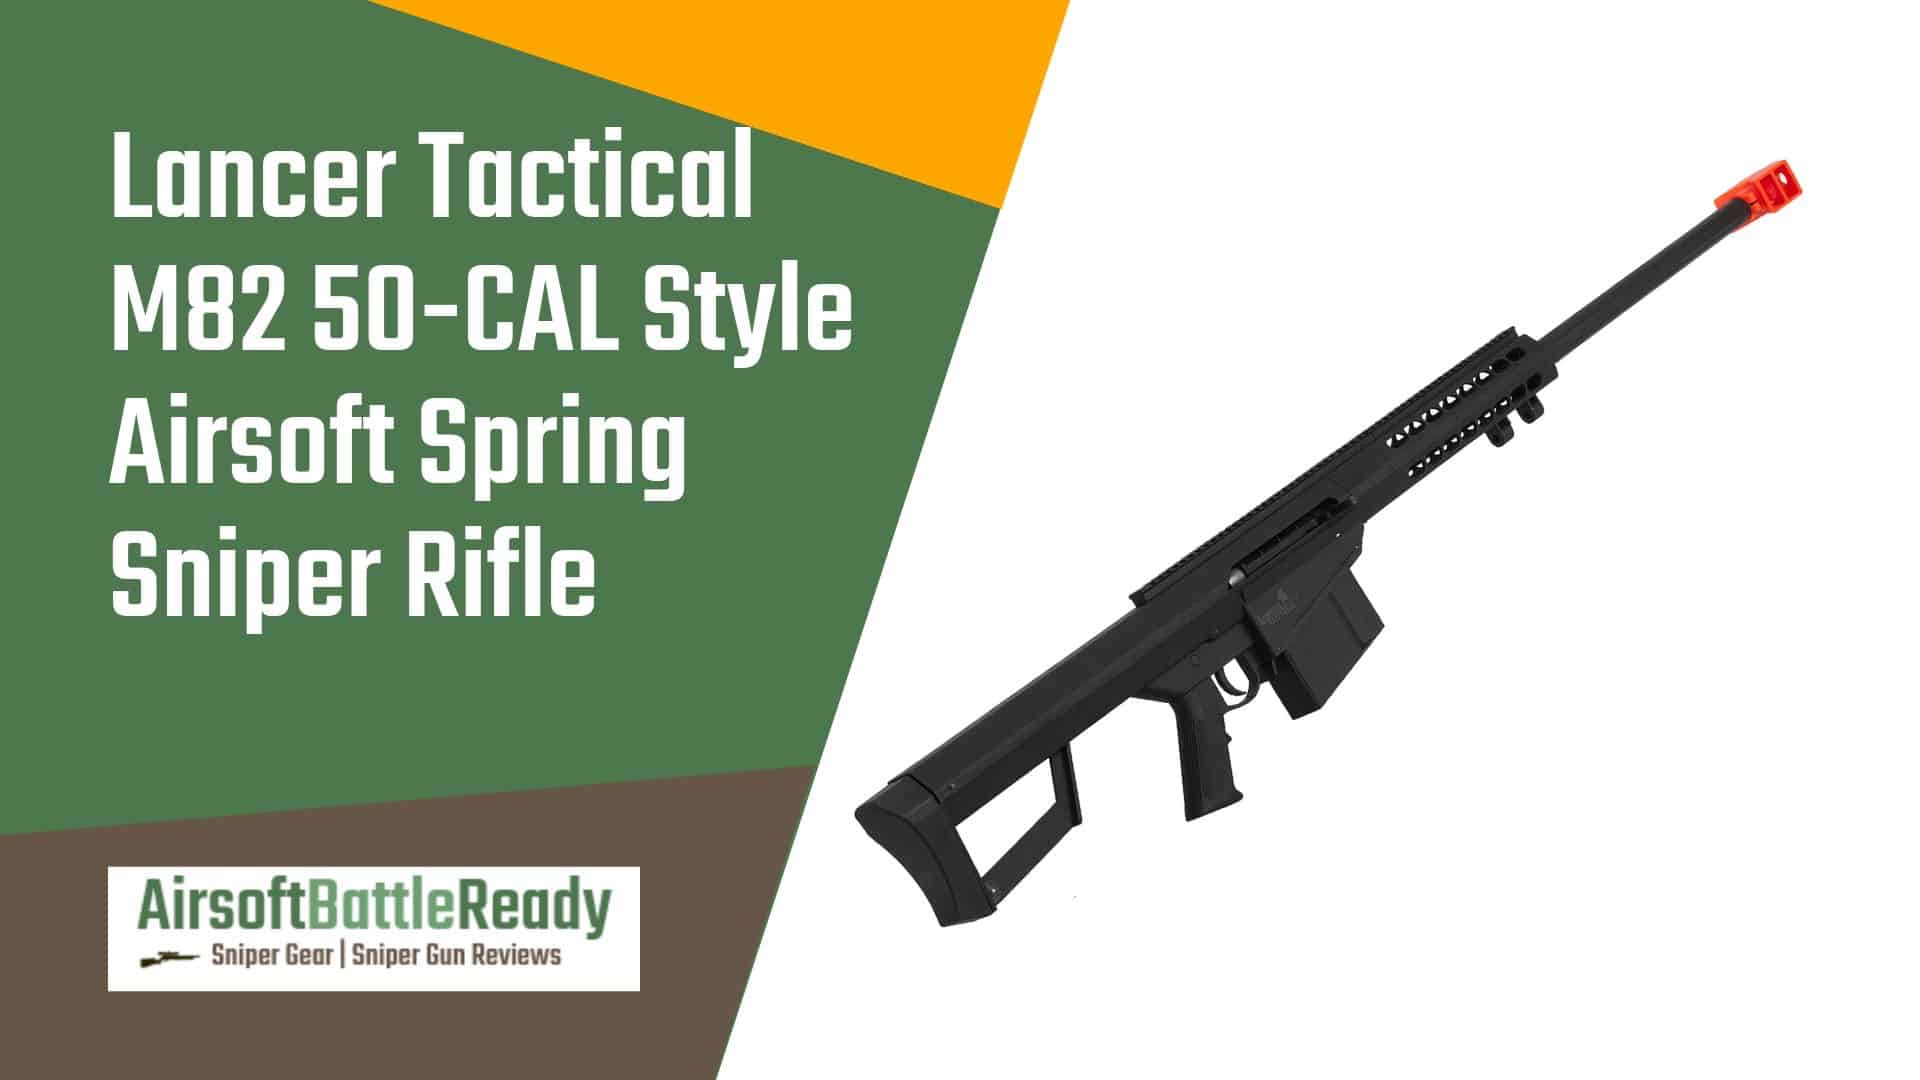 Lancer Tactical M82 50-CAL Style Airsoft Spring Sniper Rifle Review - Airsoft Battle Ready